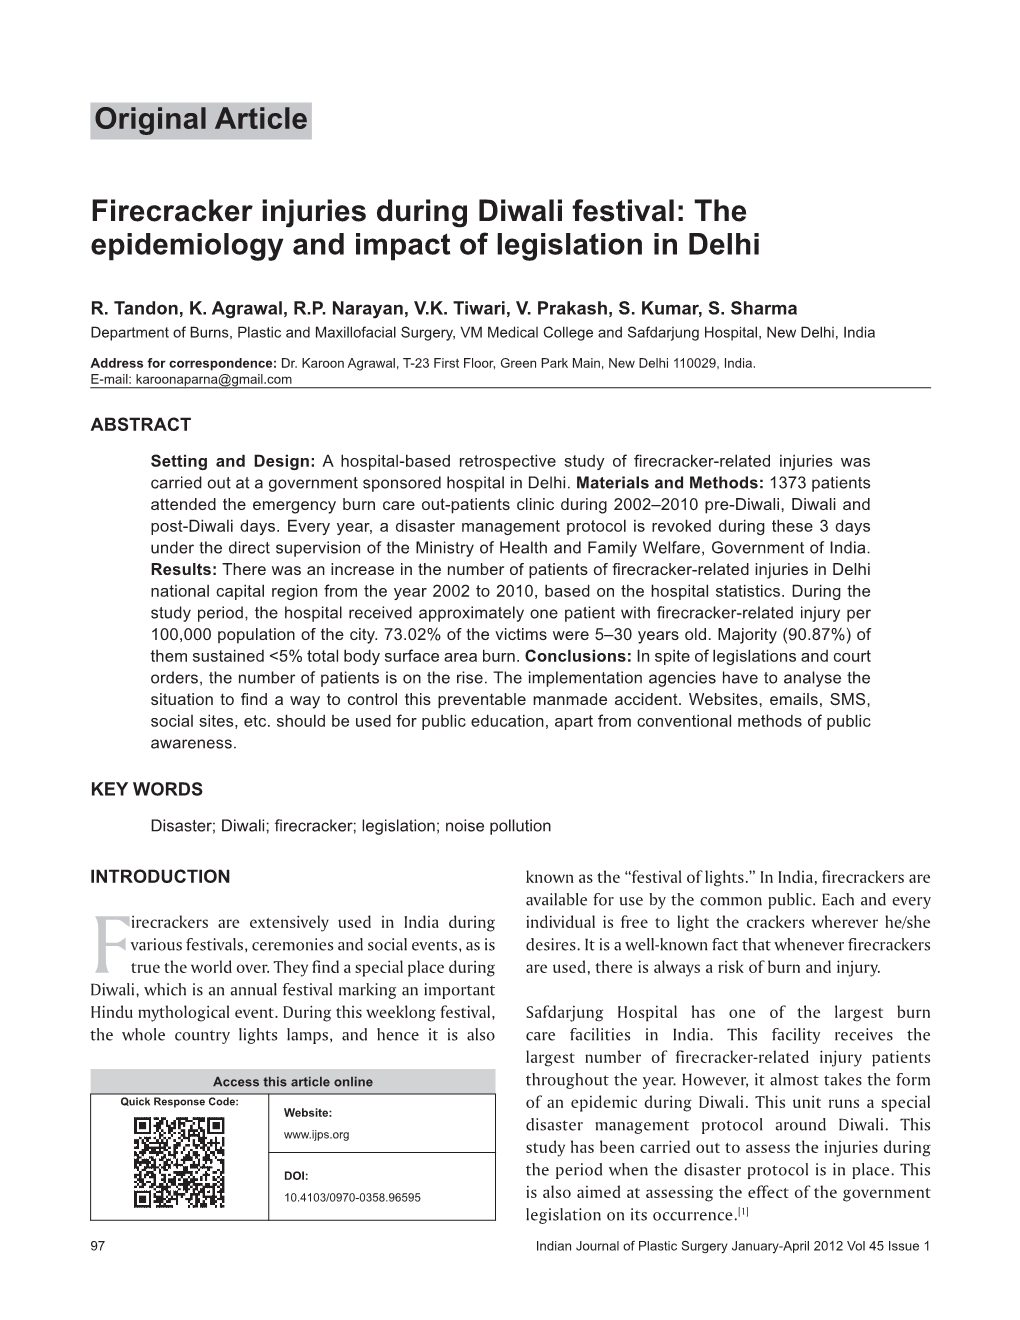 Firecracker Injuries During Diwali Festival: the Epidemiology and Impact of Legislation in Delhi